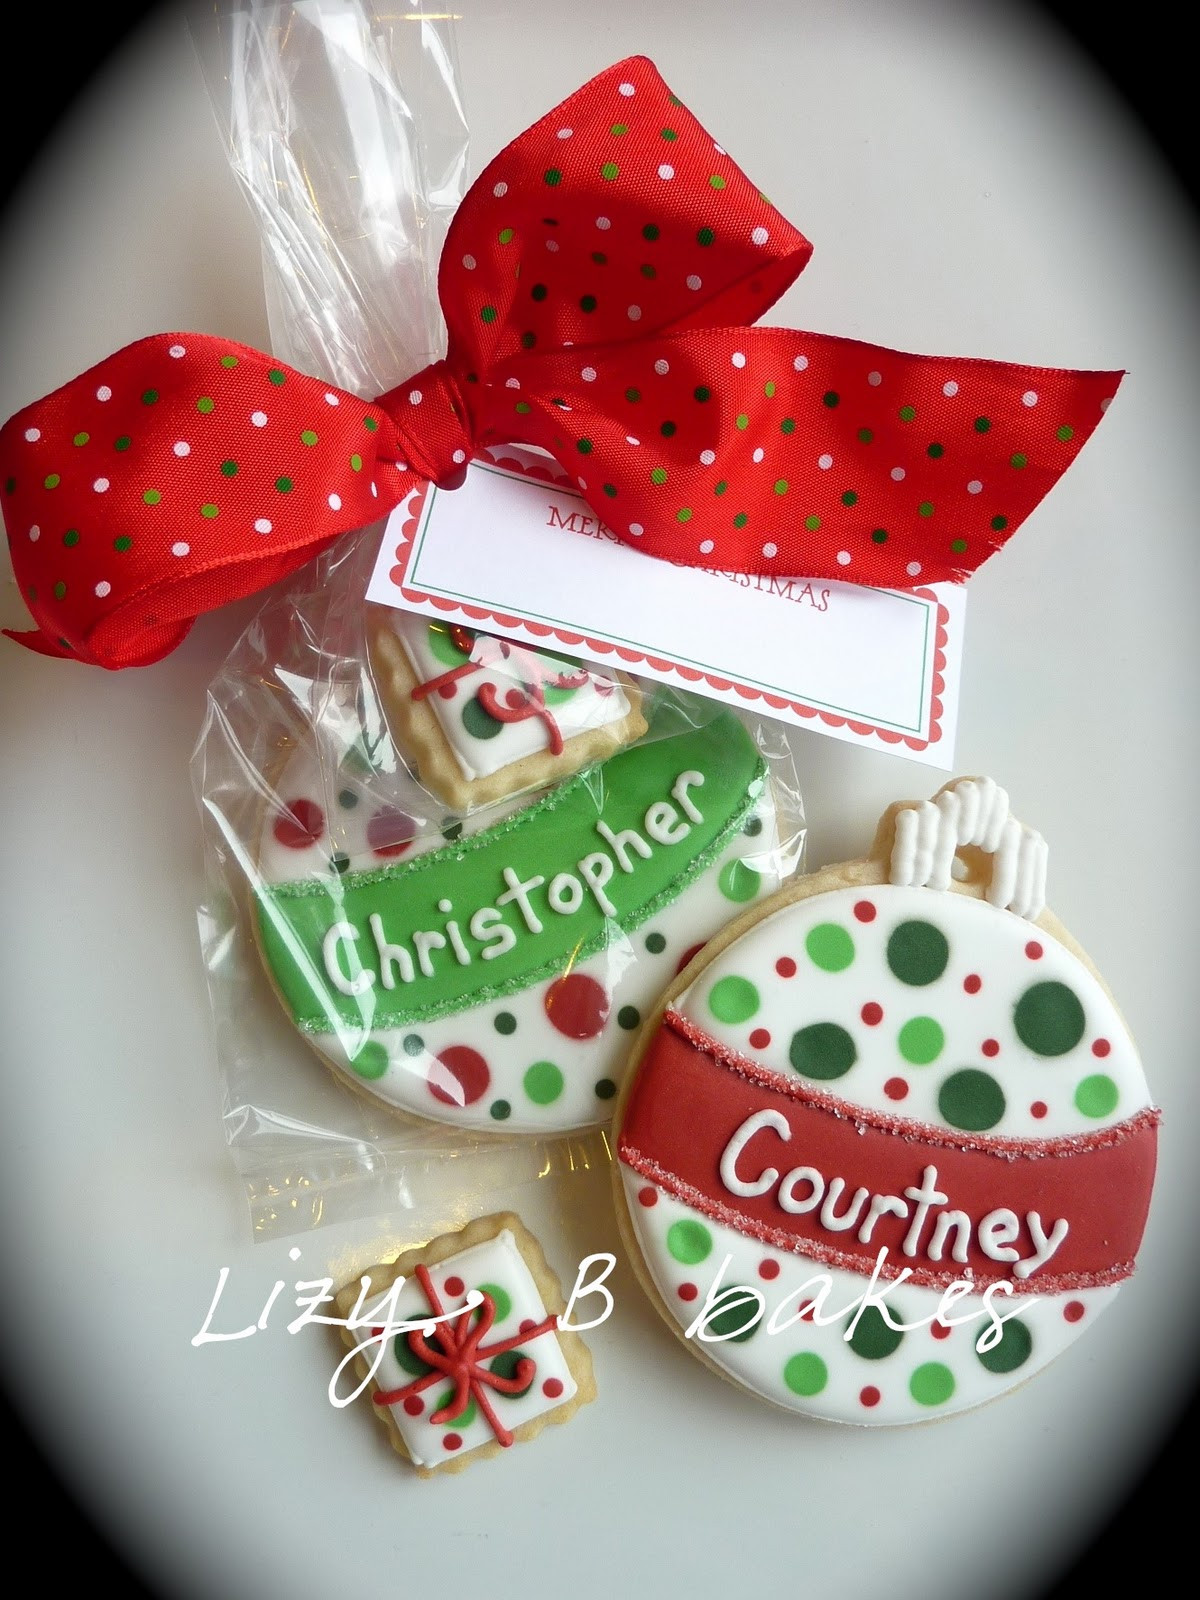 Cookies Gifts For Christmas
 Lizy B Personalized Christmas Cookies